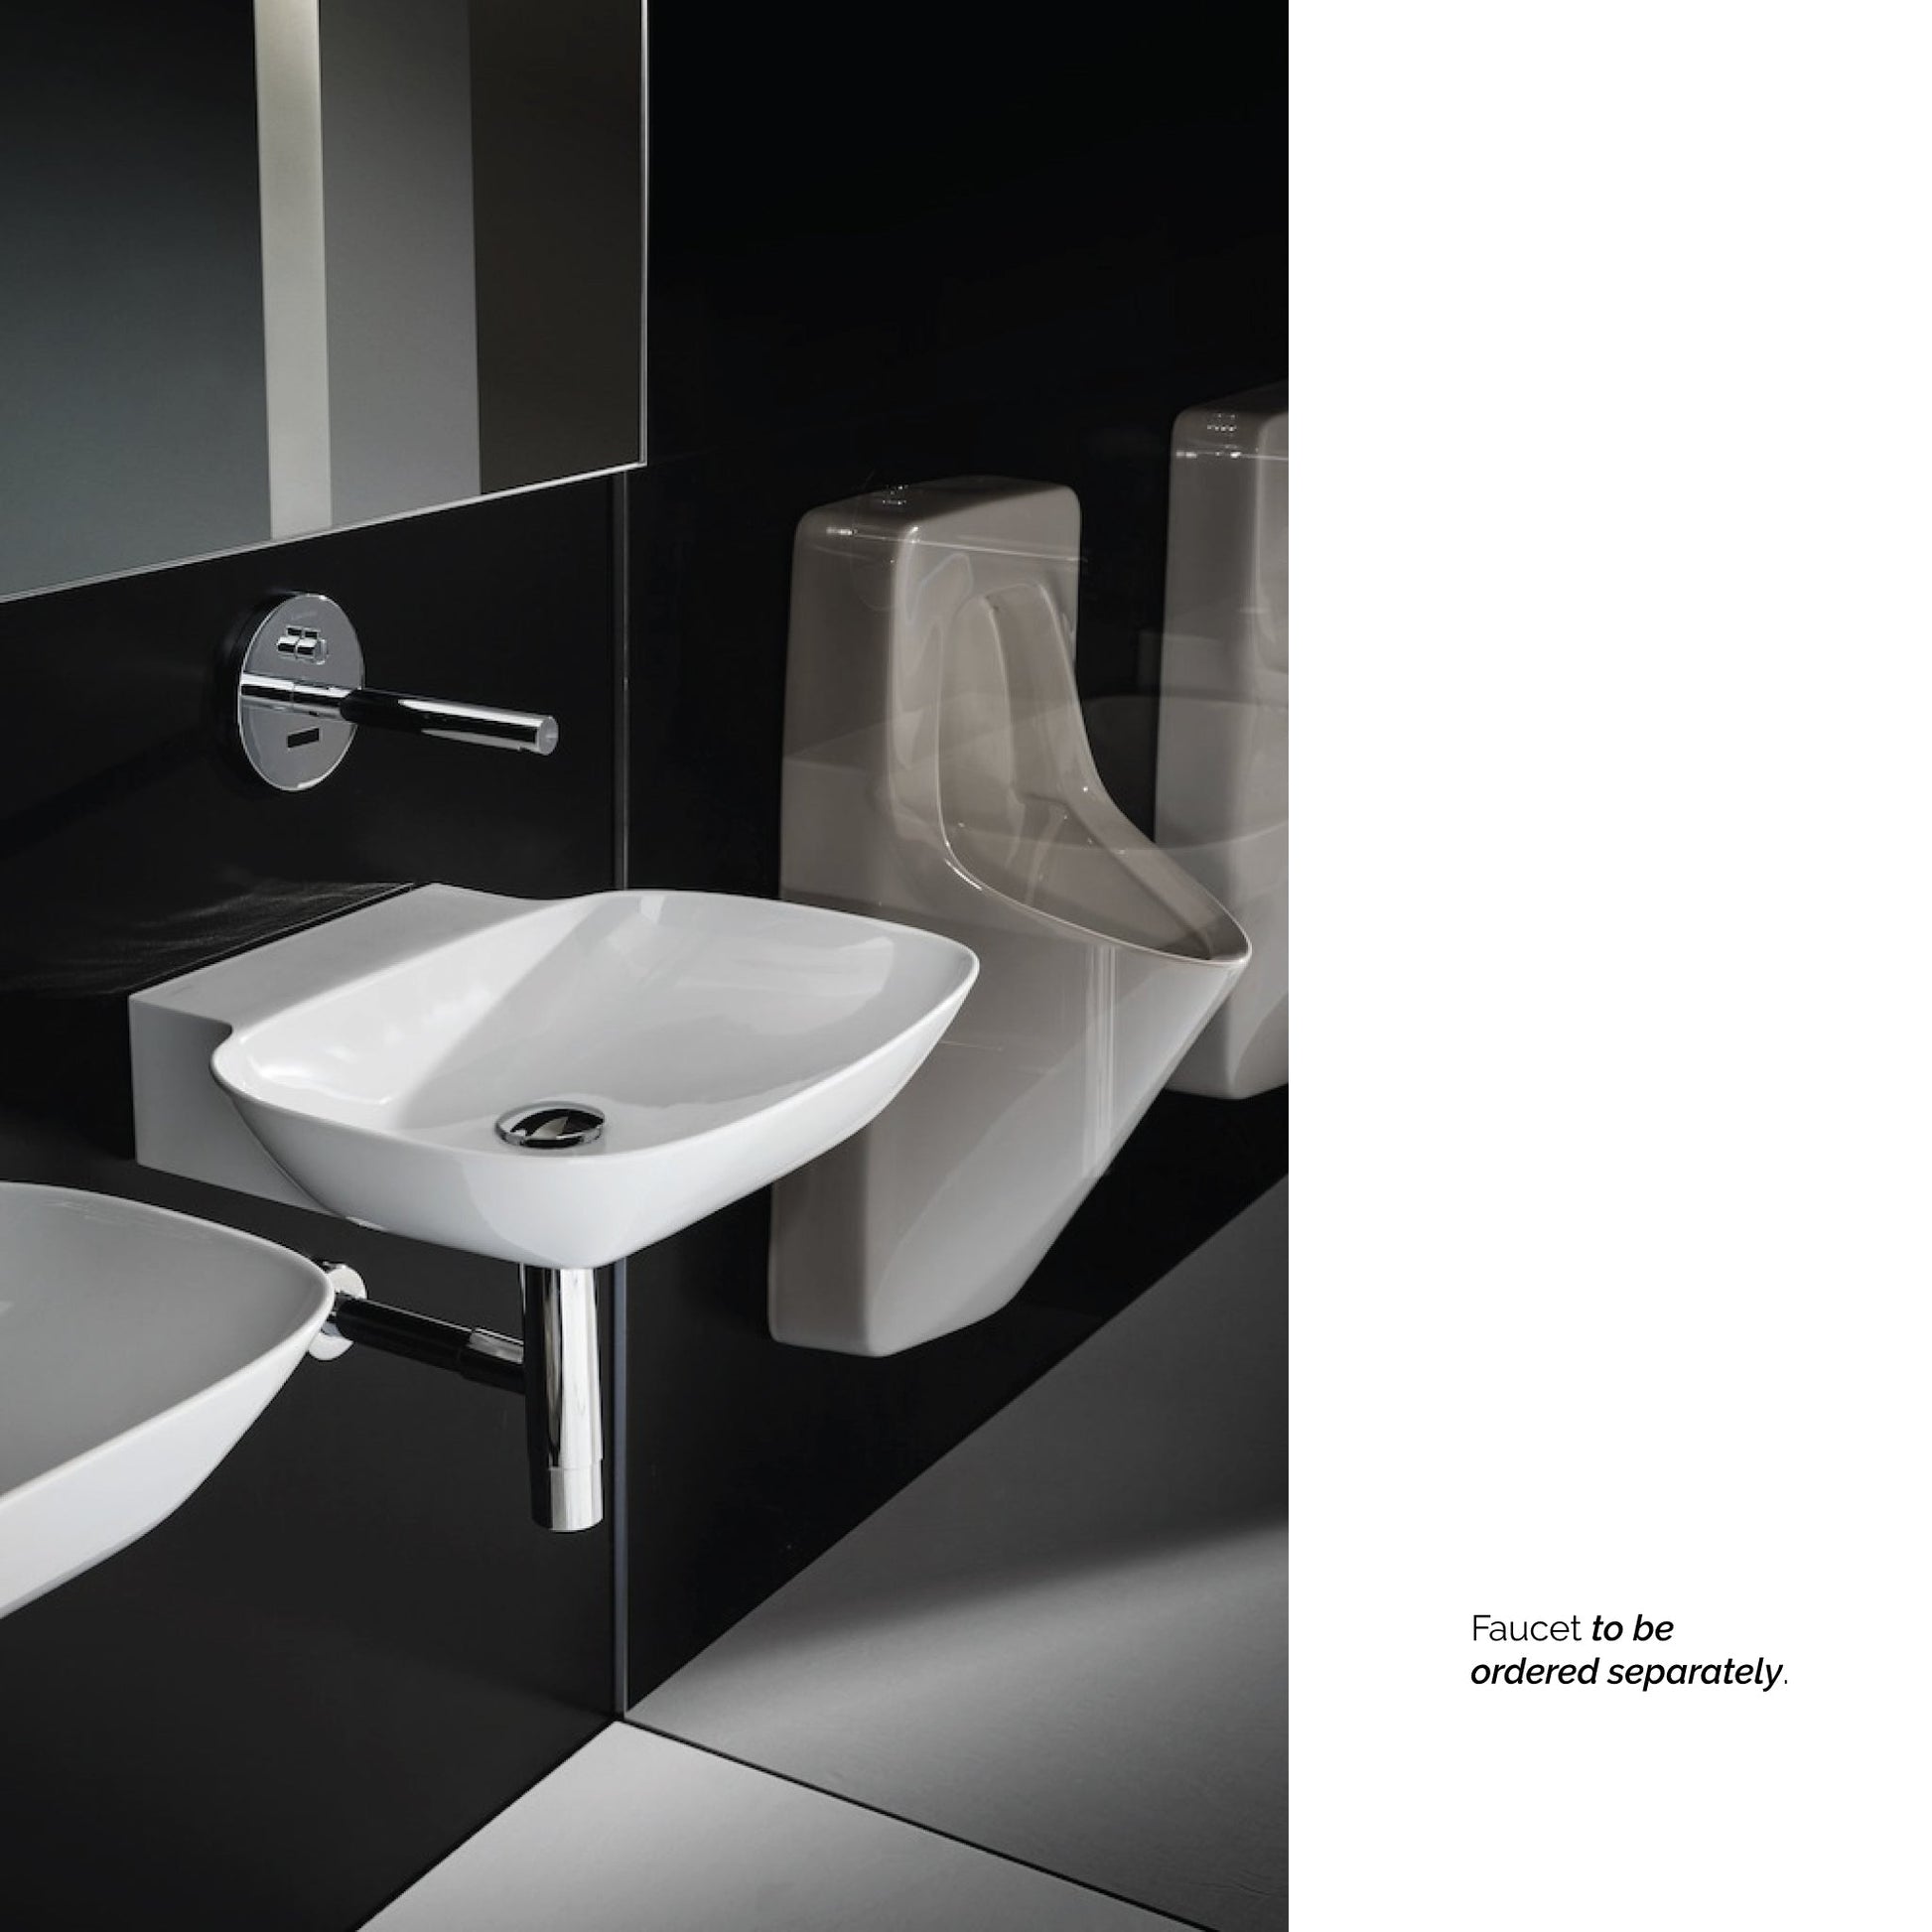 Laufen Ino 22" x 18" Rectangular Matte White Wall-Mounted Bathroom Sink Without Faucet Hole